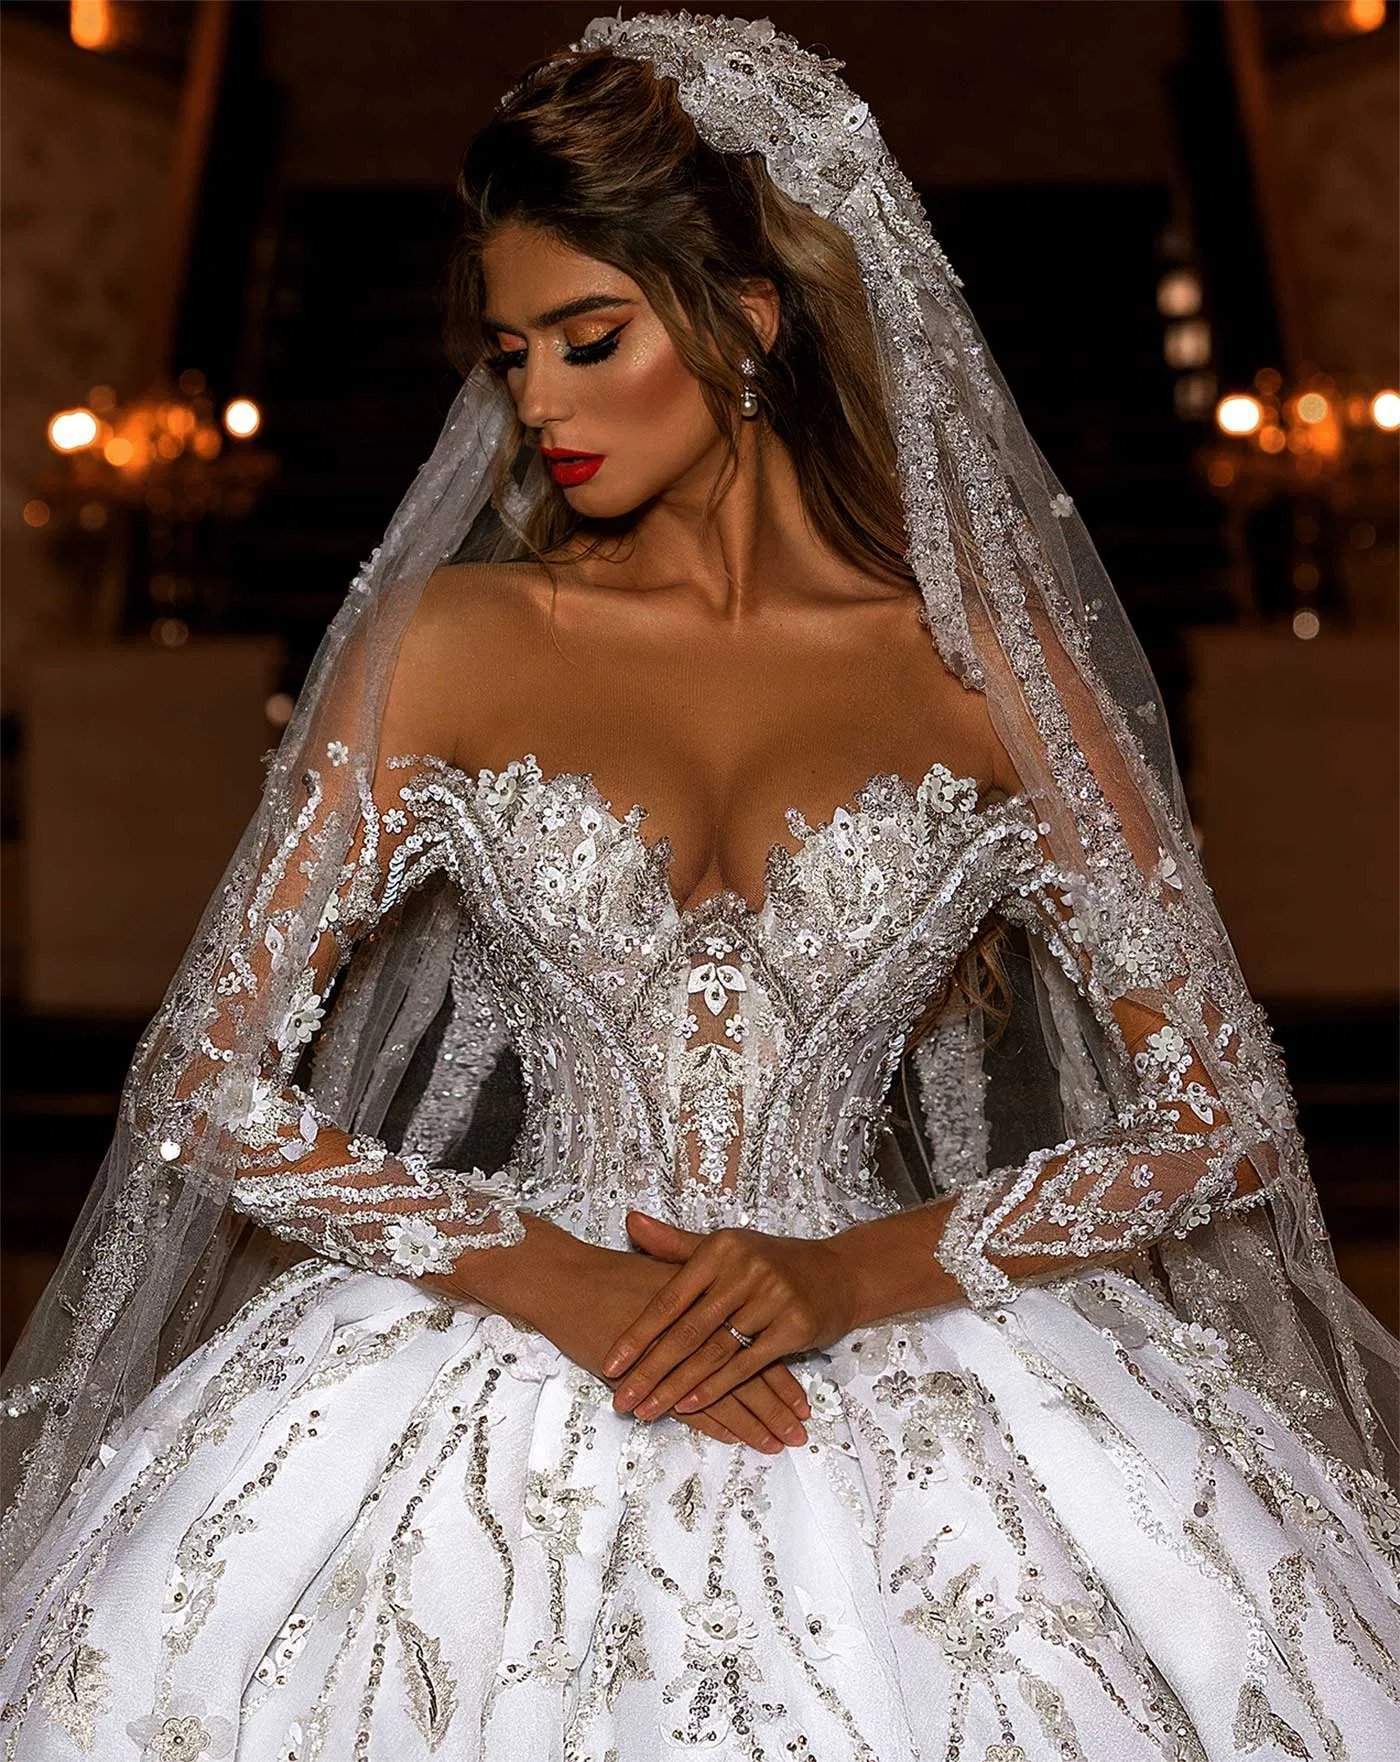 Online Beaded Ball Gown Appliques White Wedding Dress Transparent  Embroidered Plunge Long Sleeved Lace Gorgeous Backless With Train -  Ricici.com